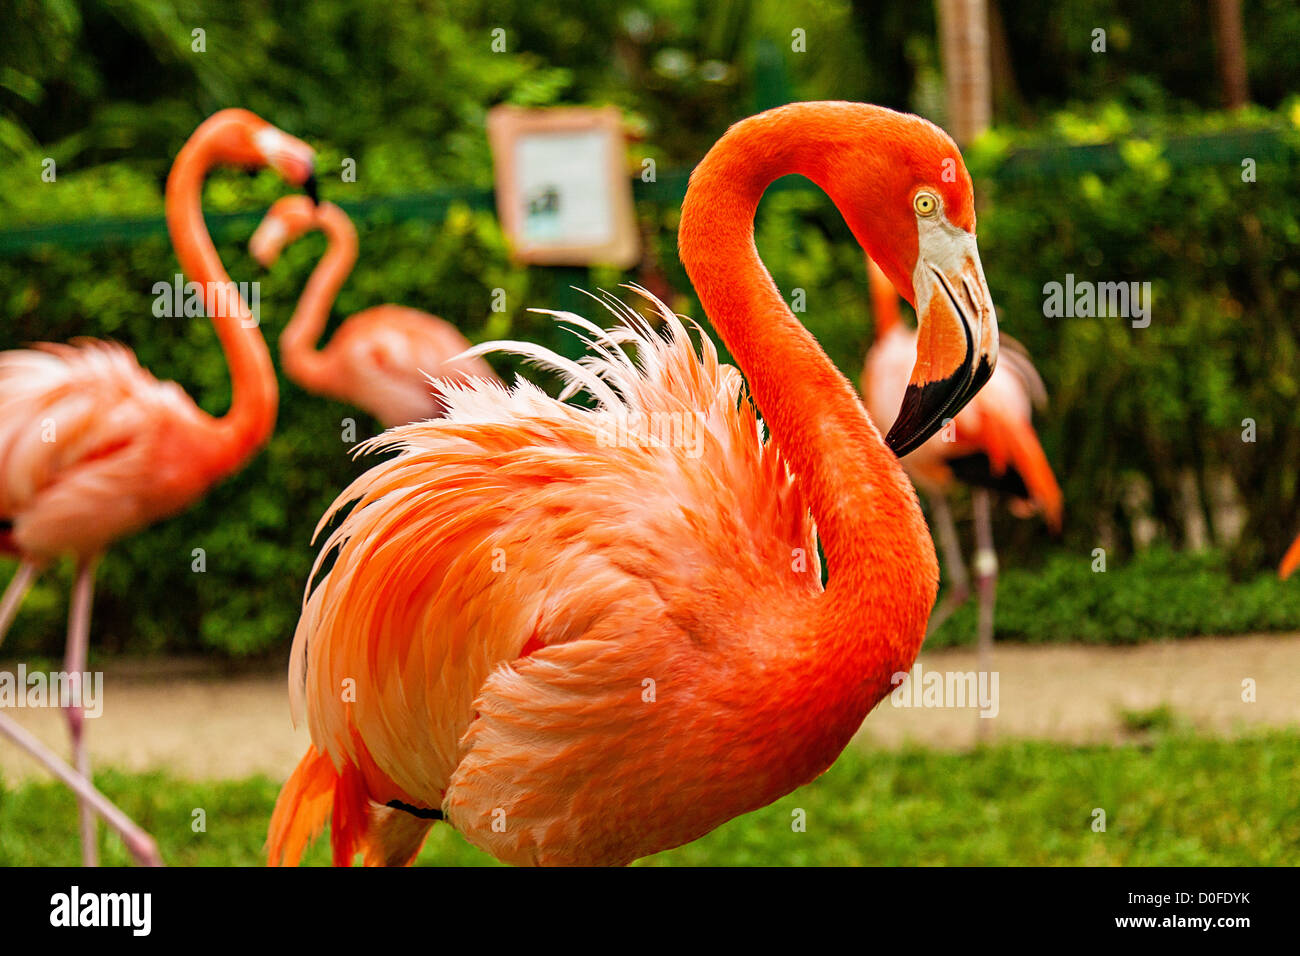 Caribbean flamingos perform their daily march at the Ardastra Gardens Zoo and Conservation Center in Nassau, The Bahamas. Stock Photo